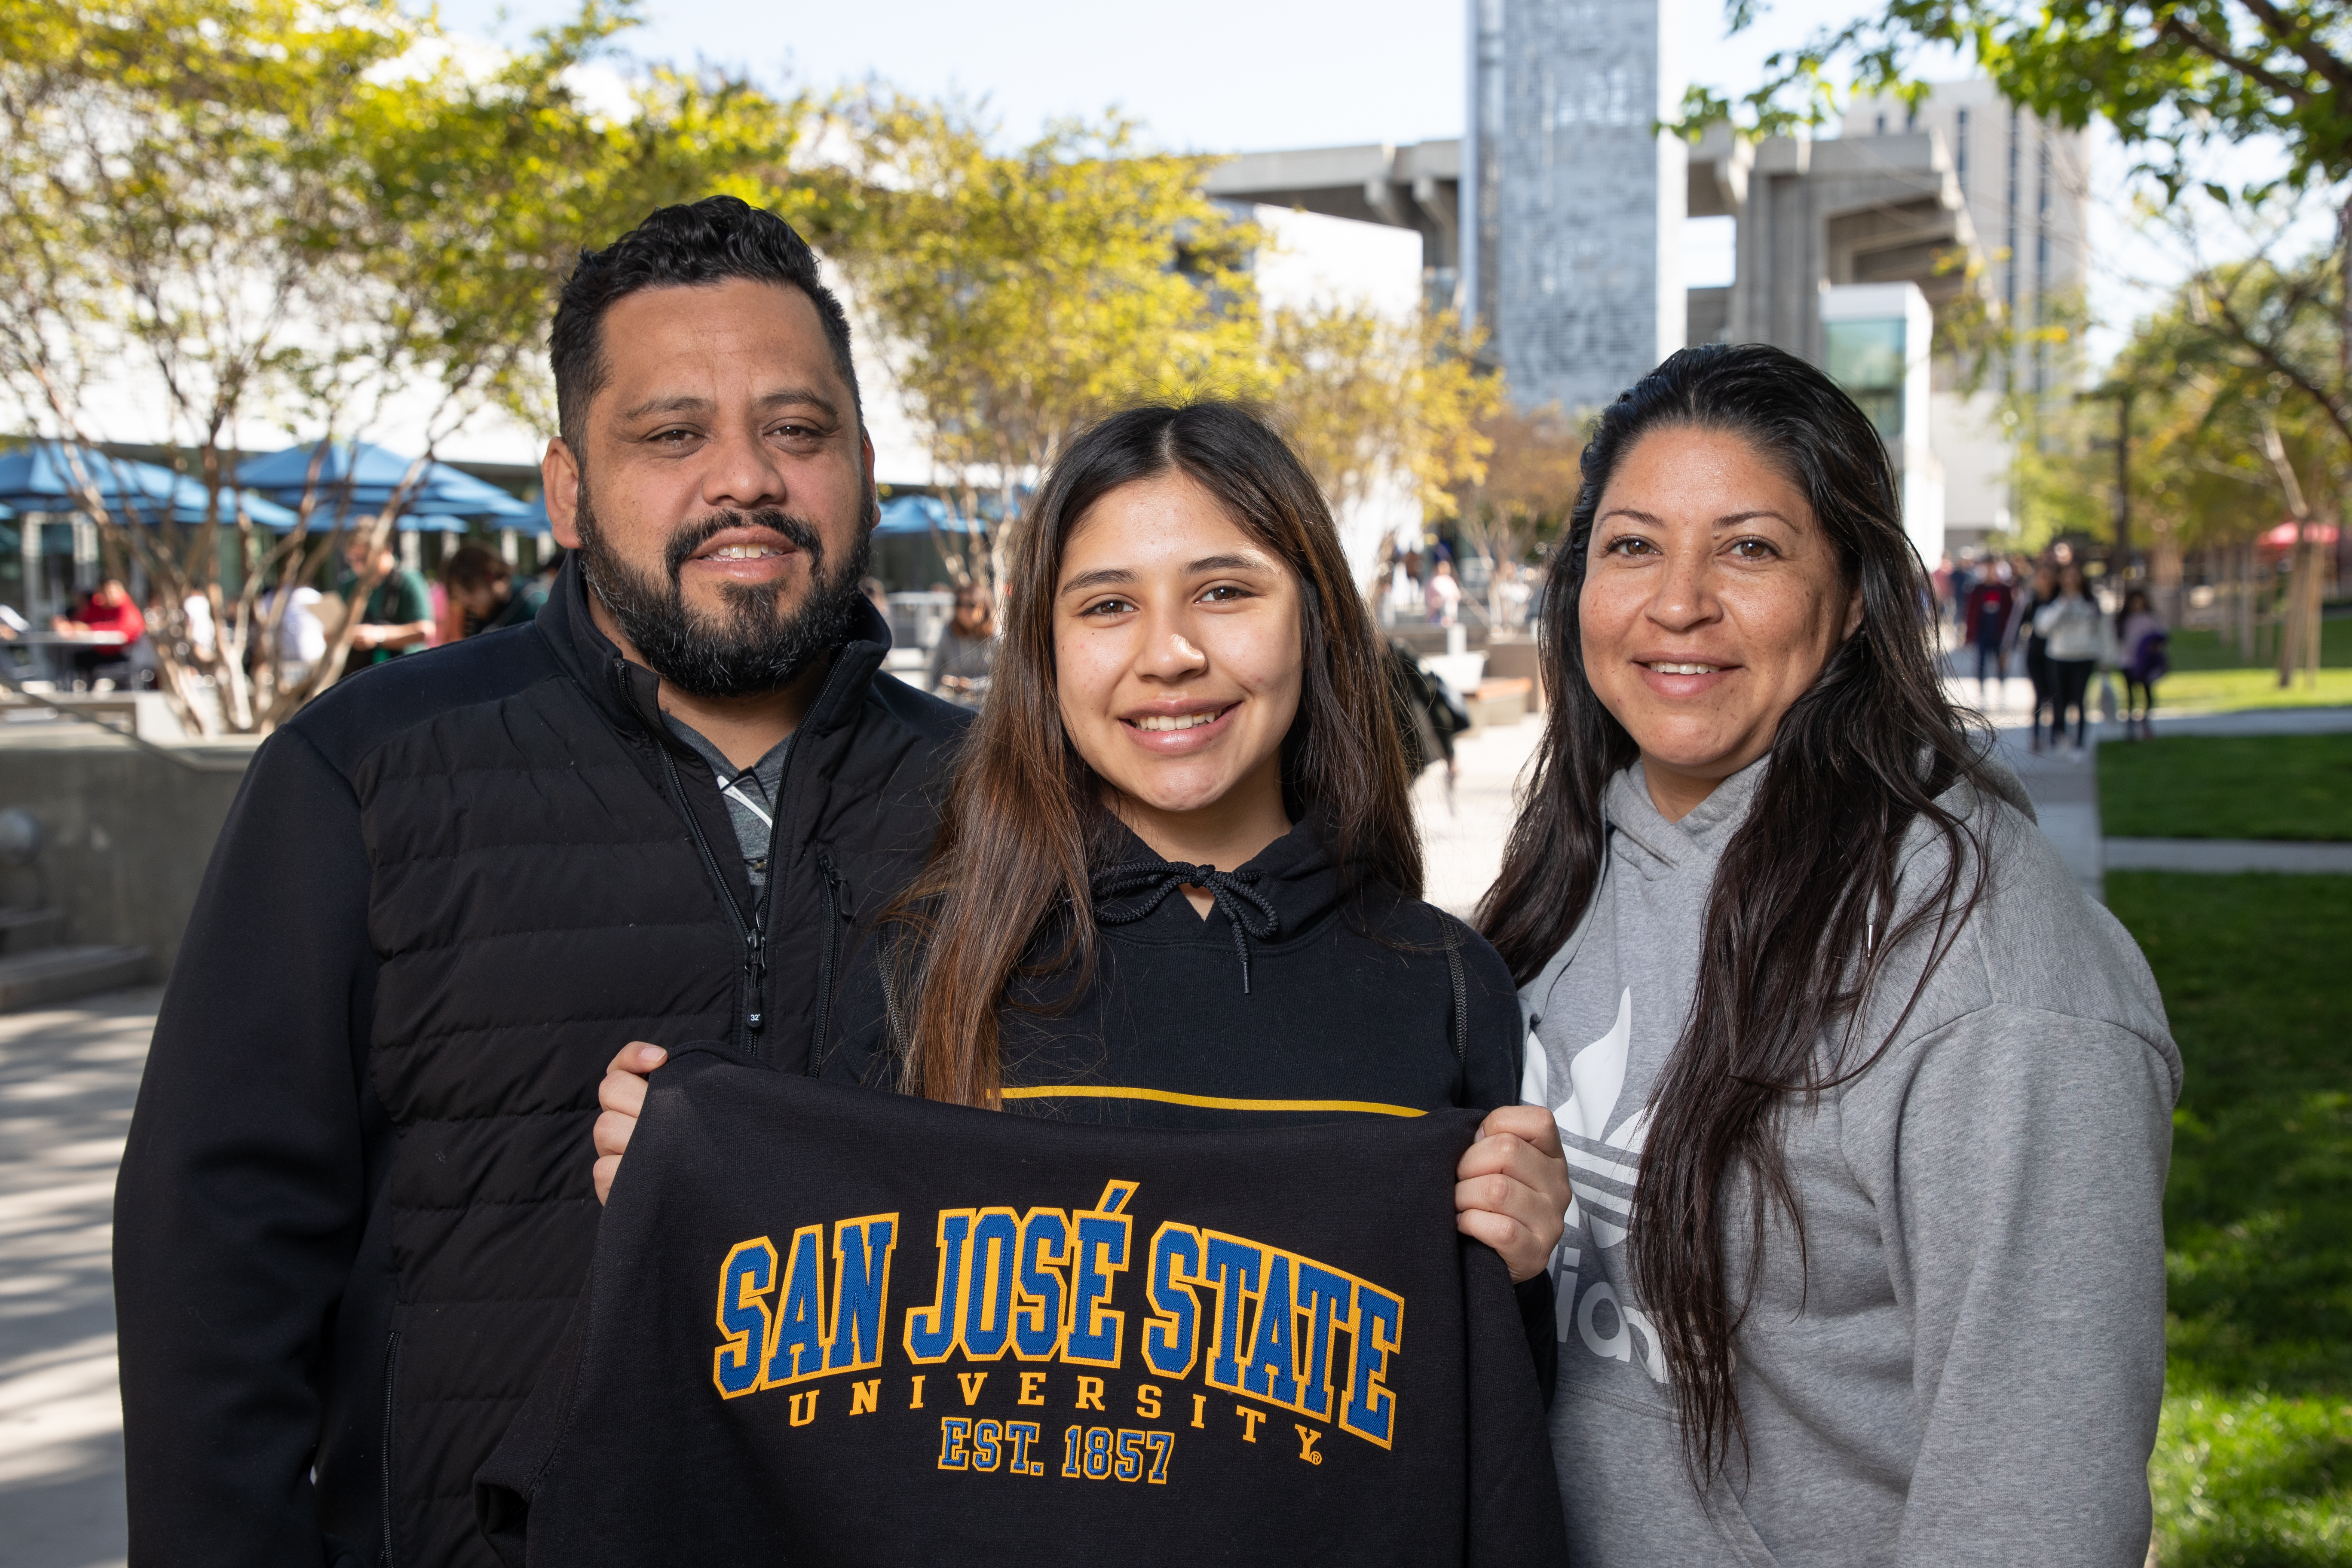 A student stands outside on campus with parents holding a SJSU sweatshirt.